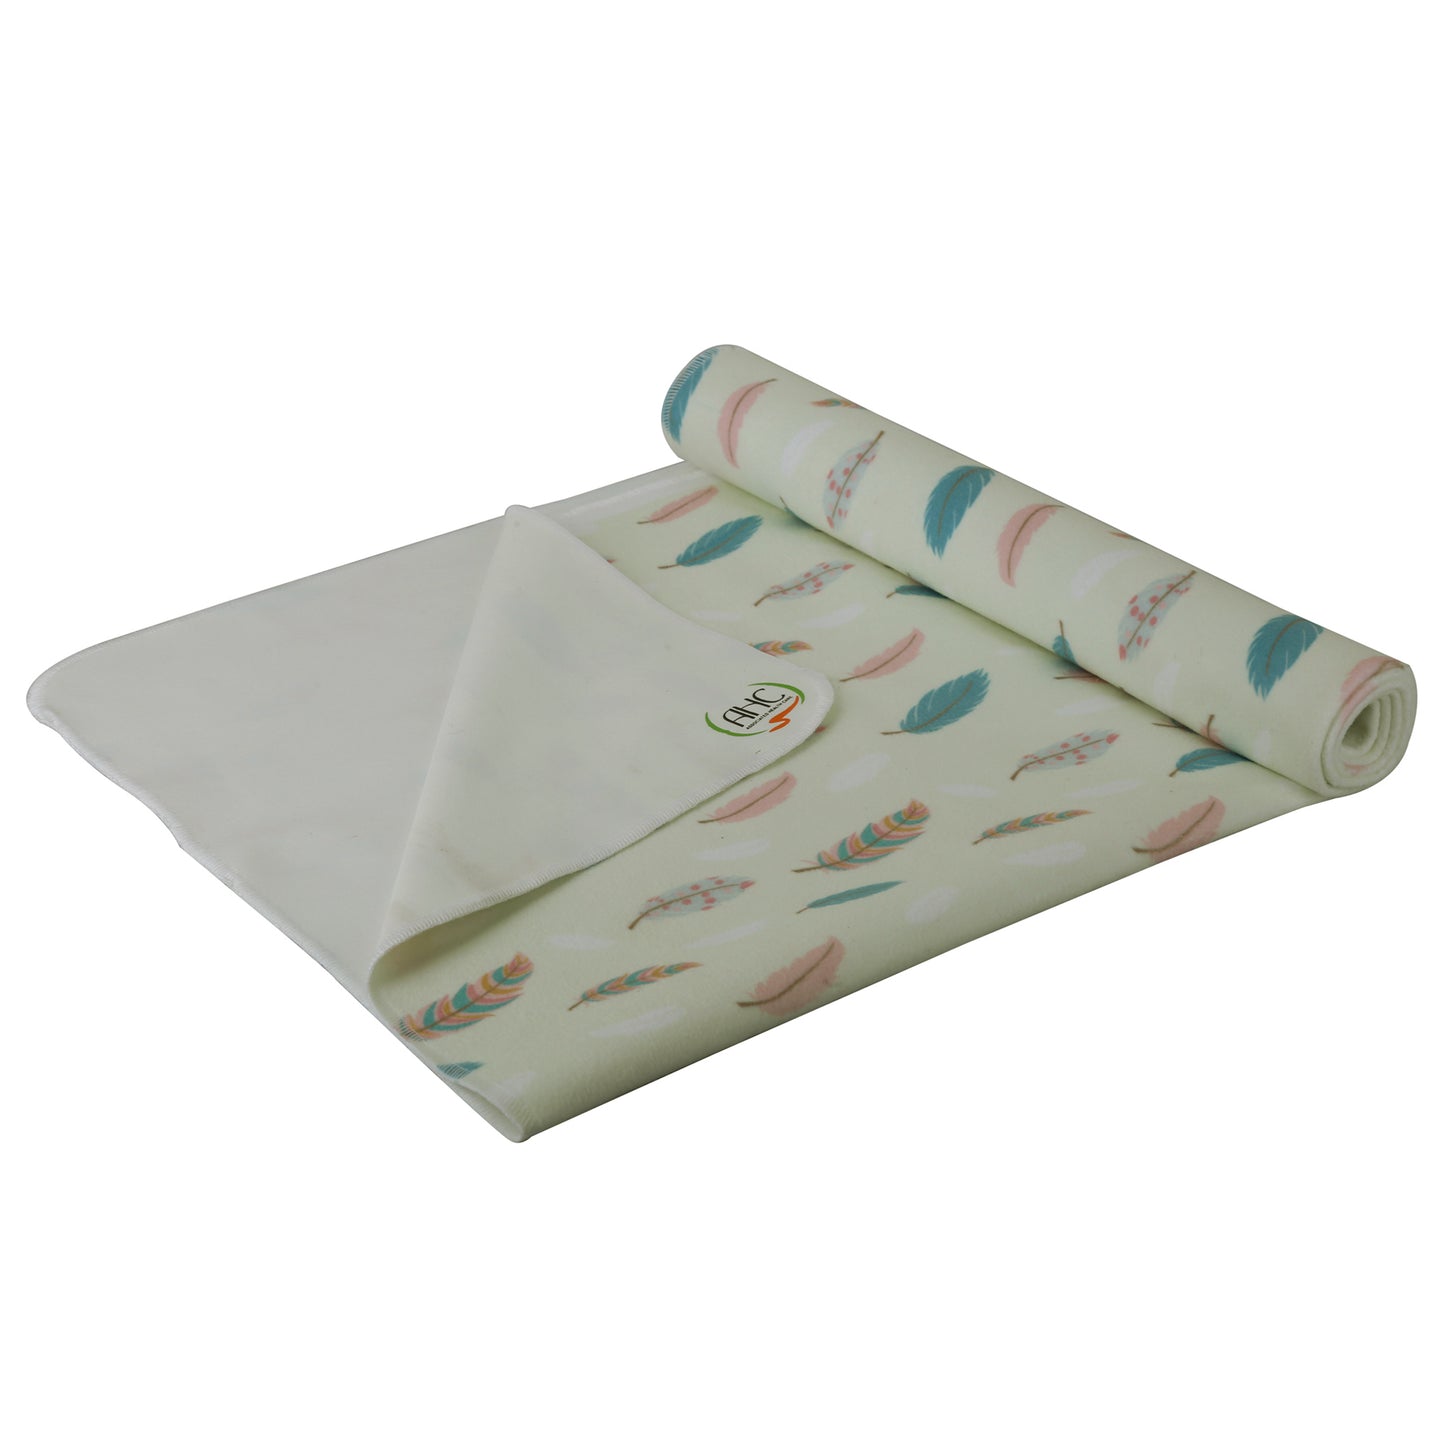 Printed Dry Sheets for Baby